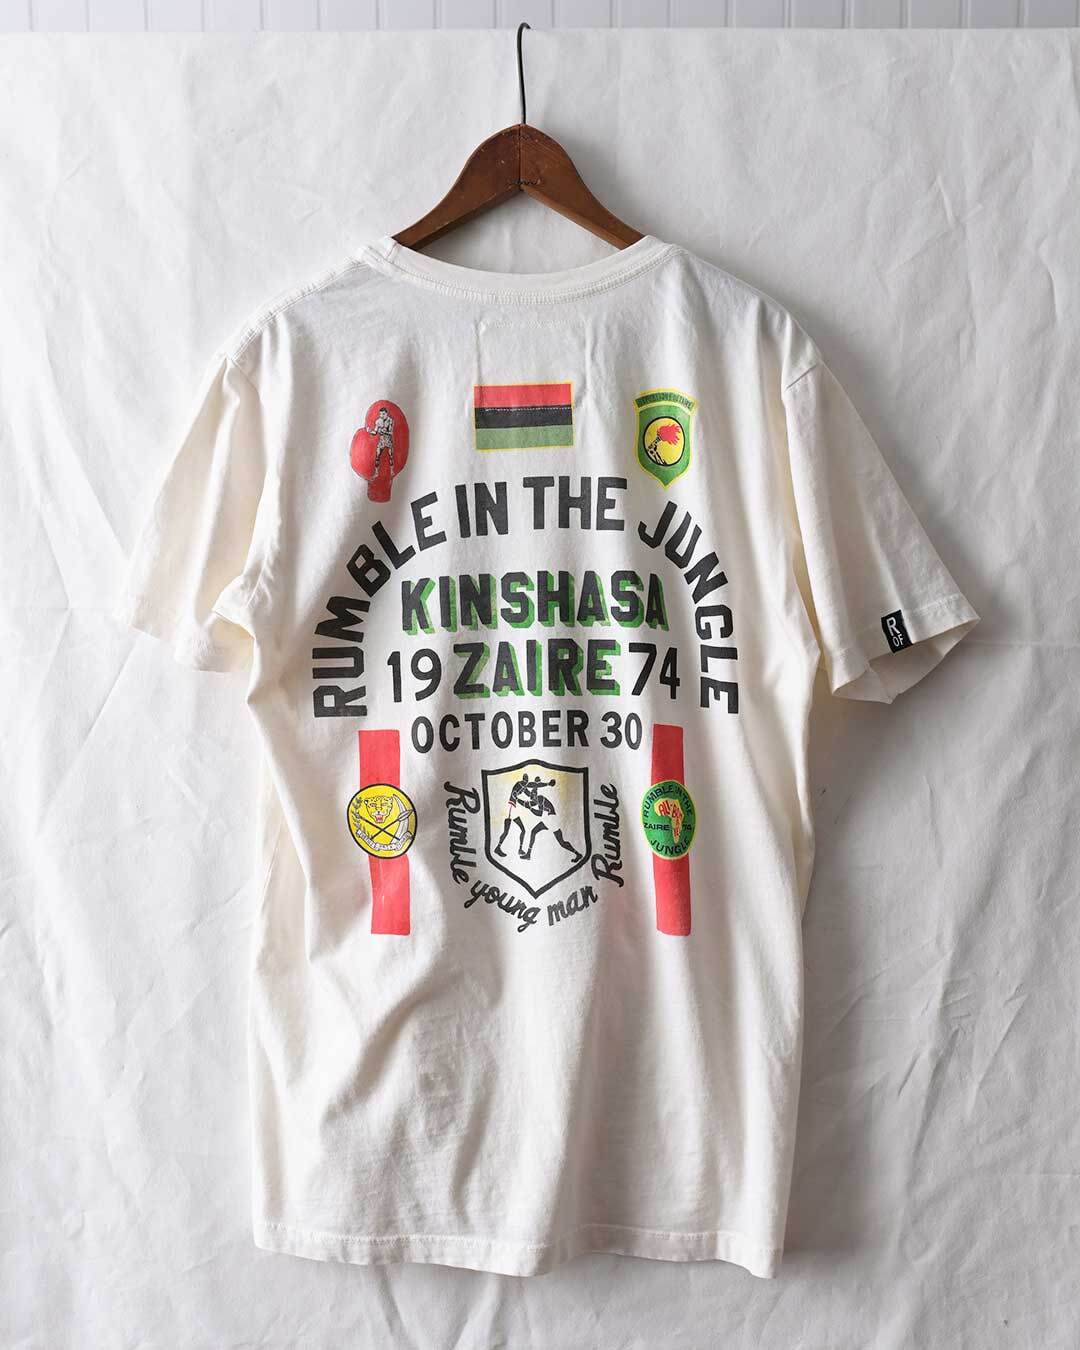 Ali Rumble &#39;The People&#39;s Champ&#39; White Tee - Roots of Fight Canada